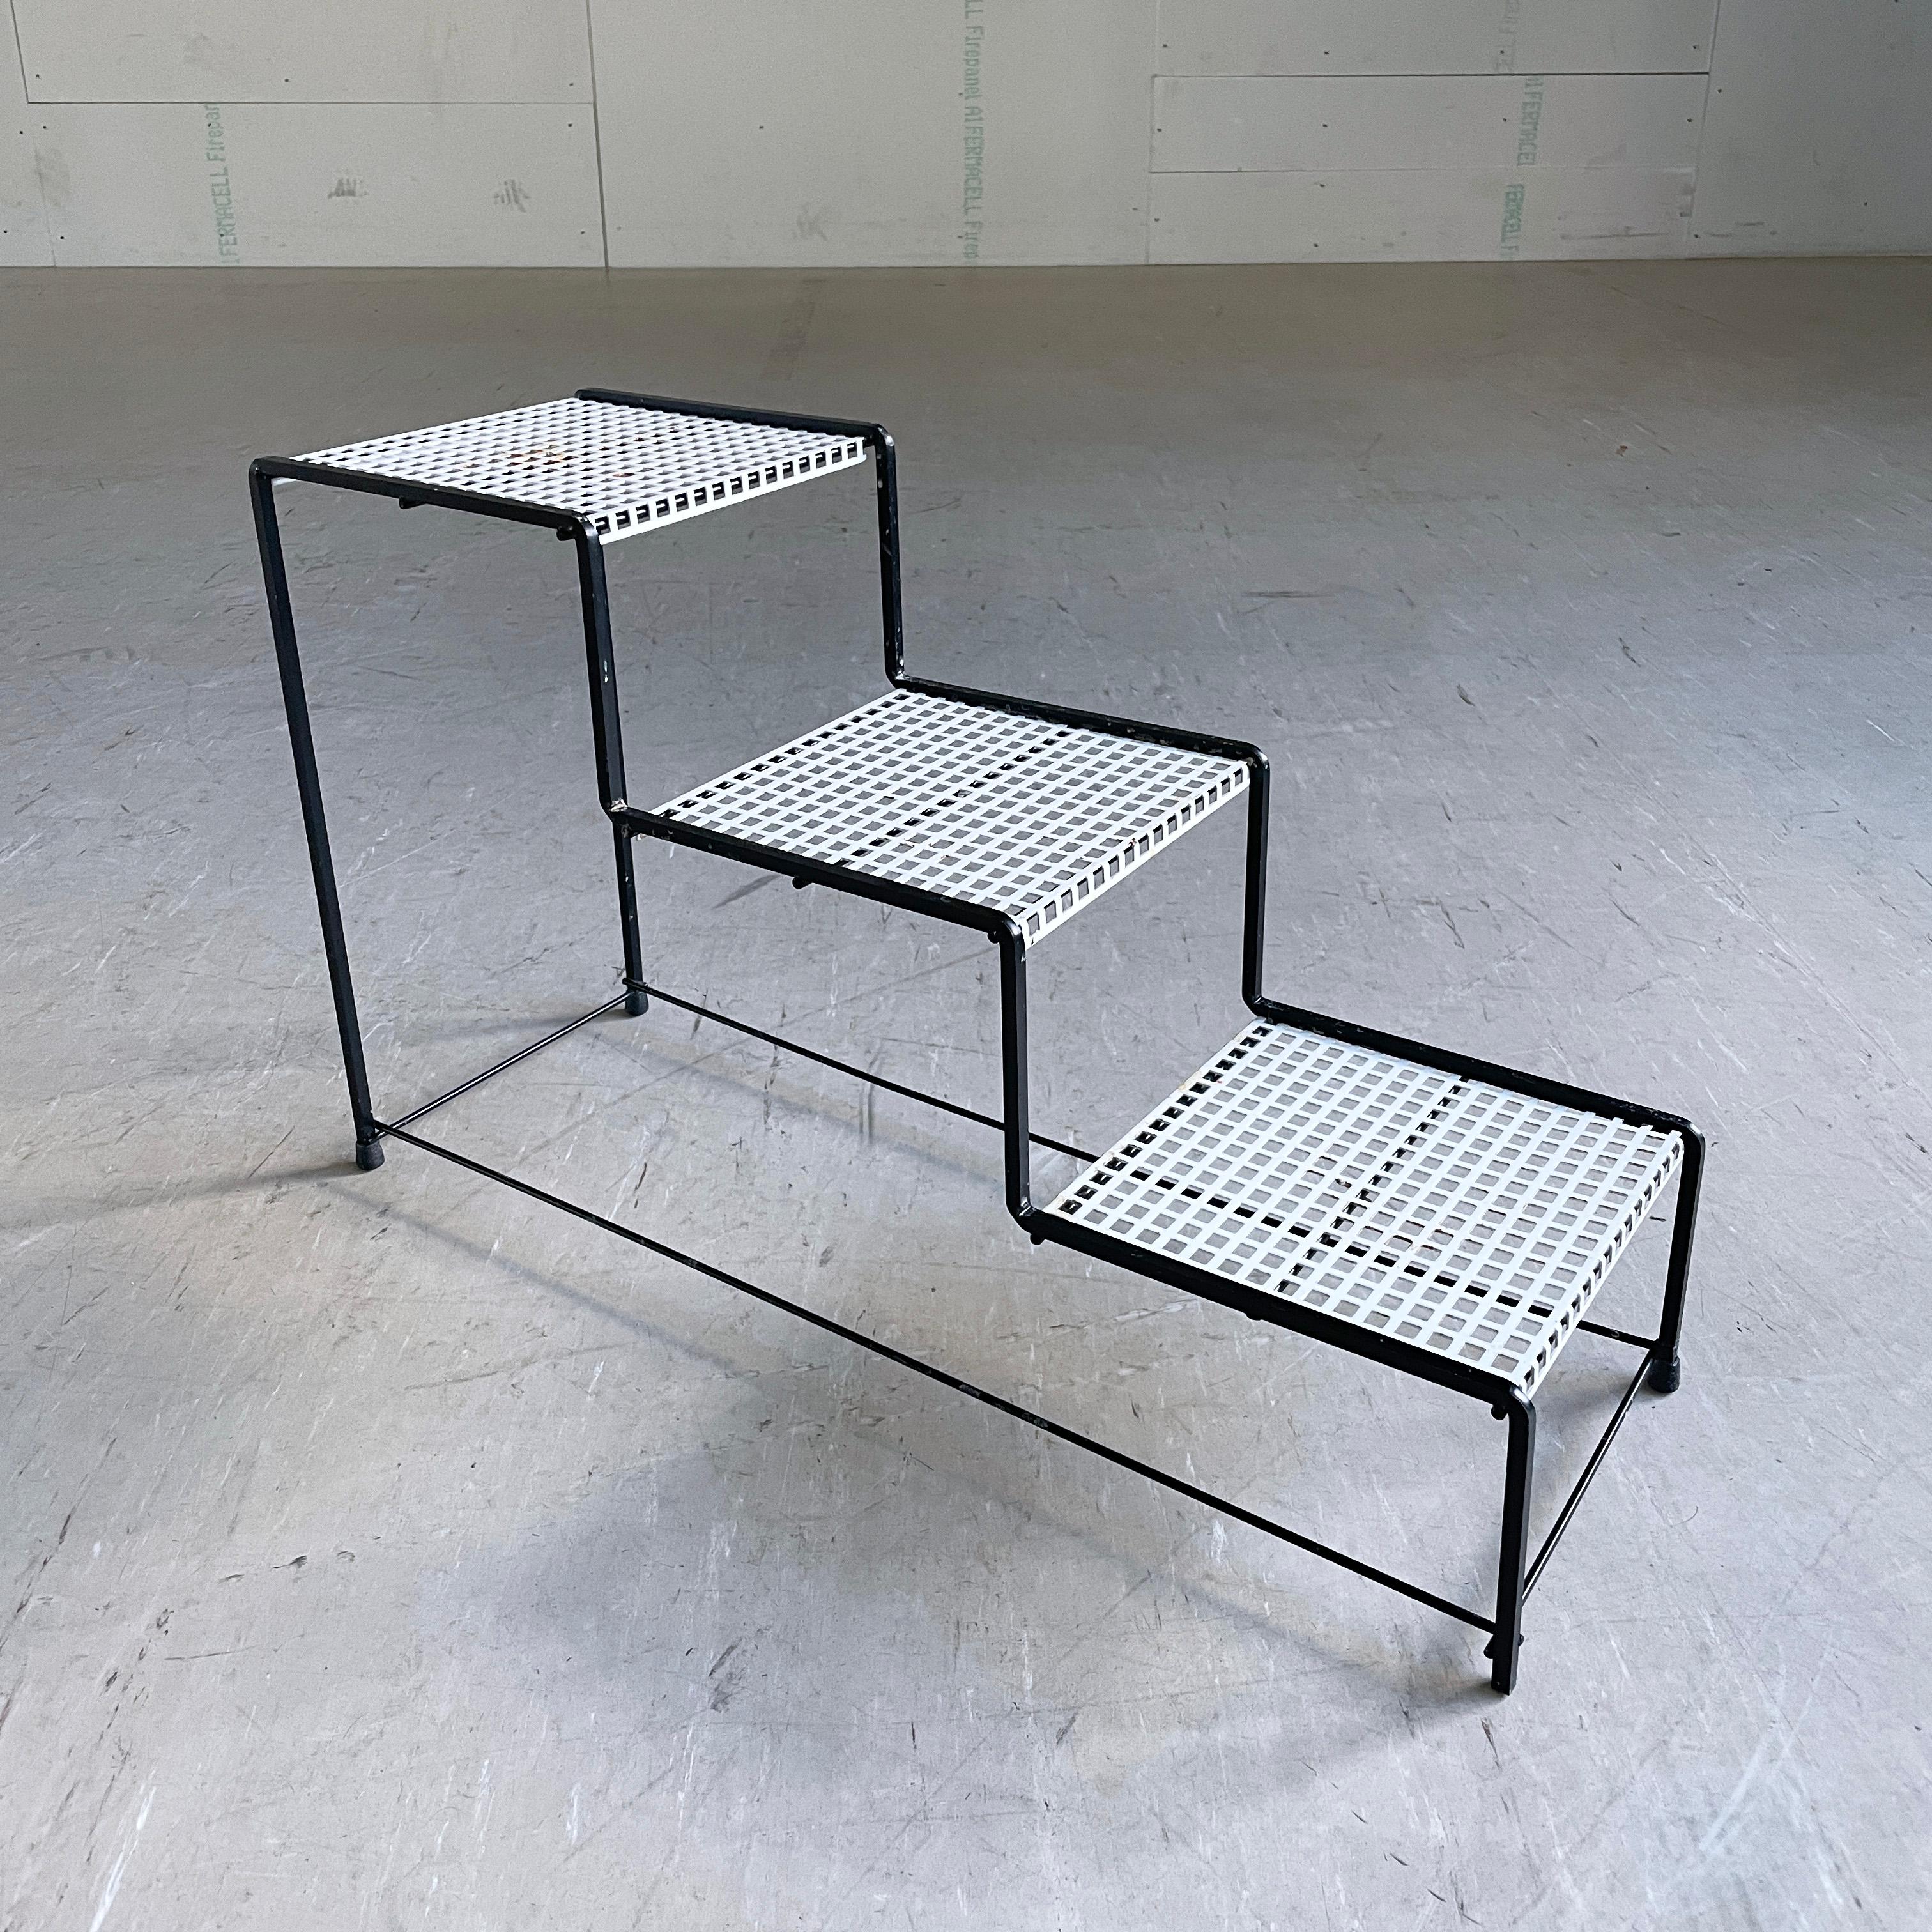 Stylish Mid Century Swiss minimalist tiered plant stand made of perforated metal with rubber feet. Reputedly produced for Möbel Pfister, Switzerland in the late 1950’s, early 1960's (unconfirmed). 
